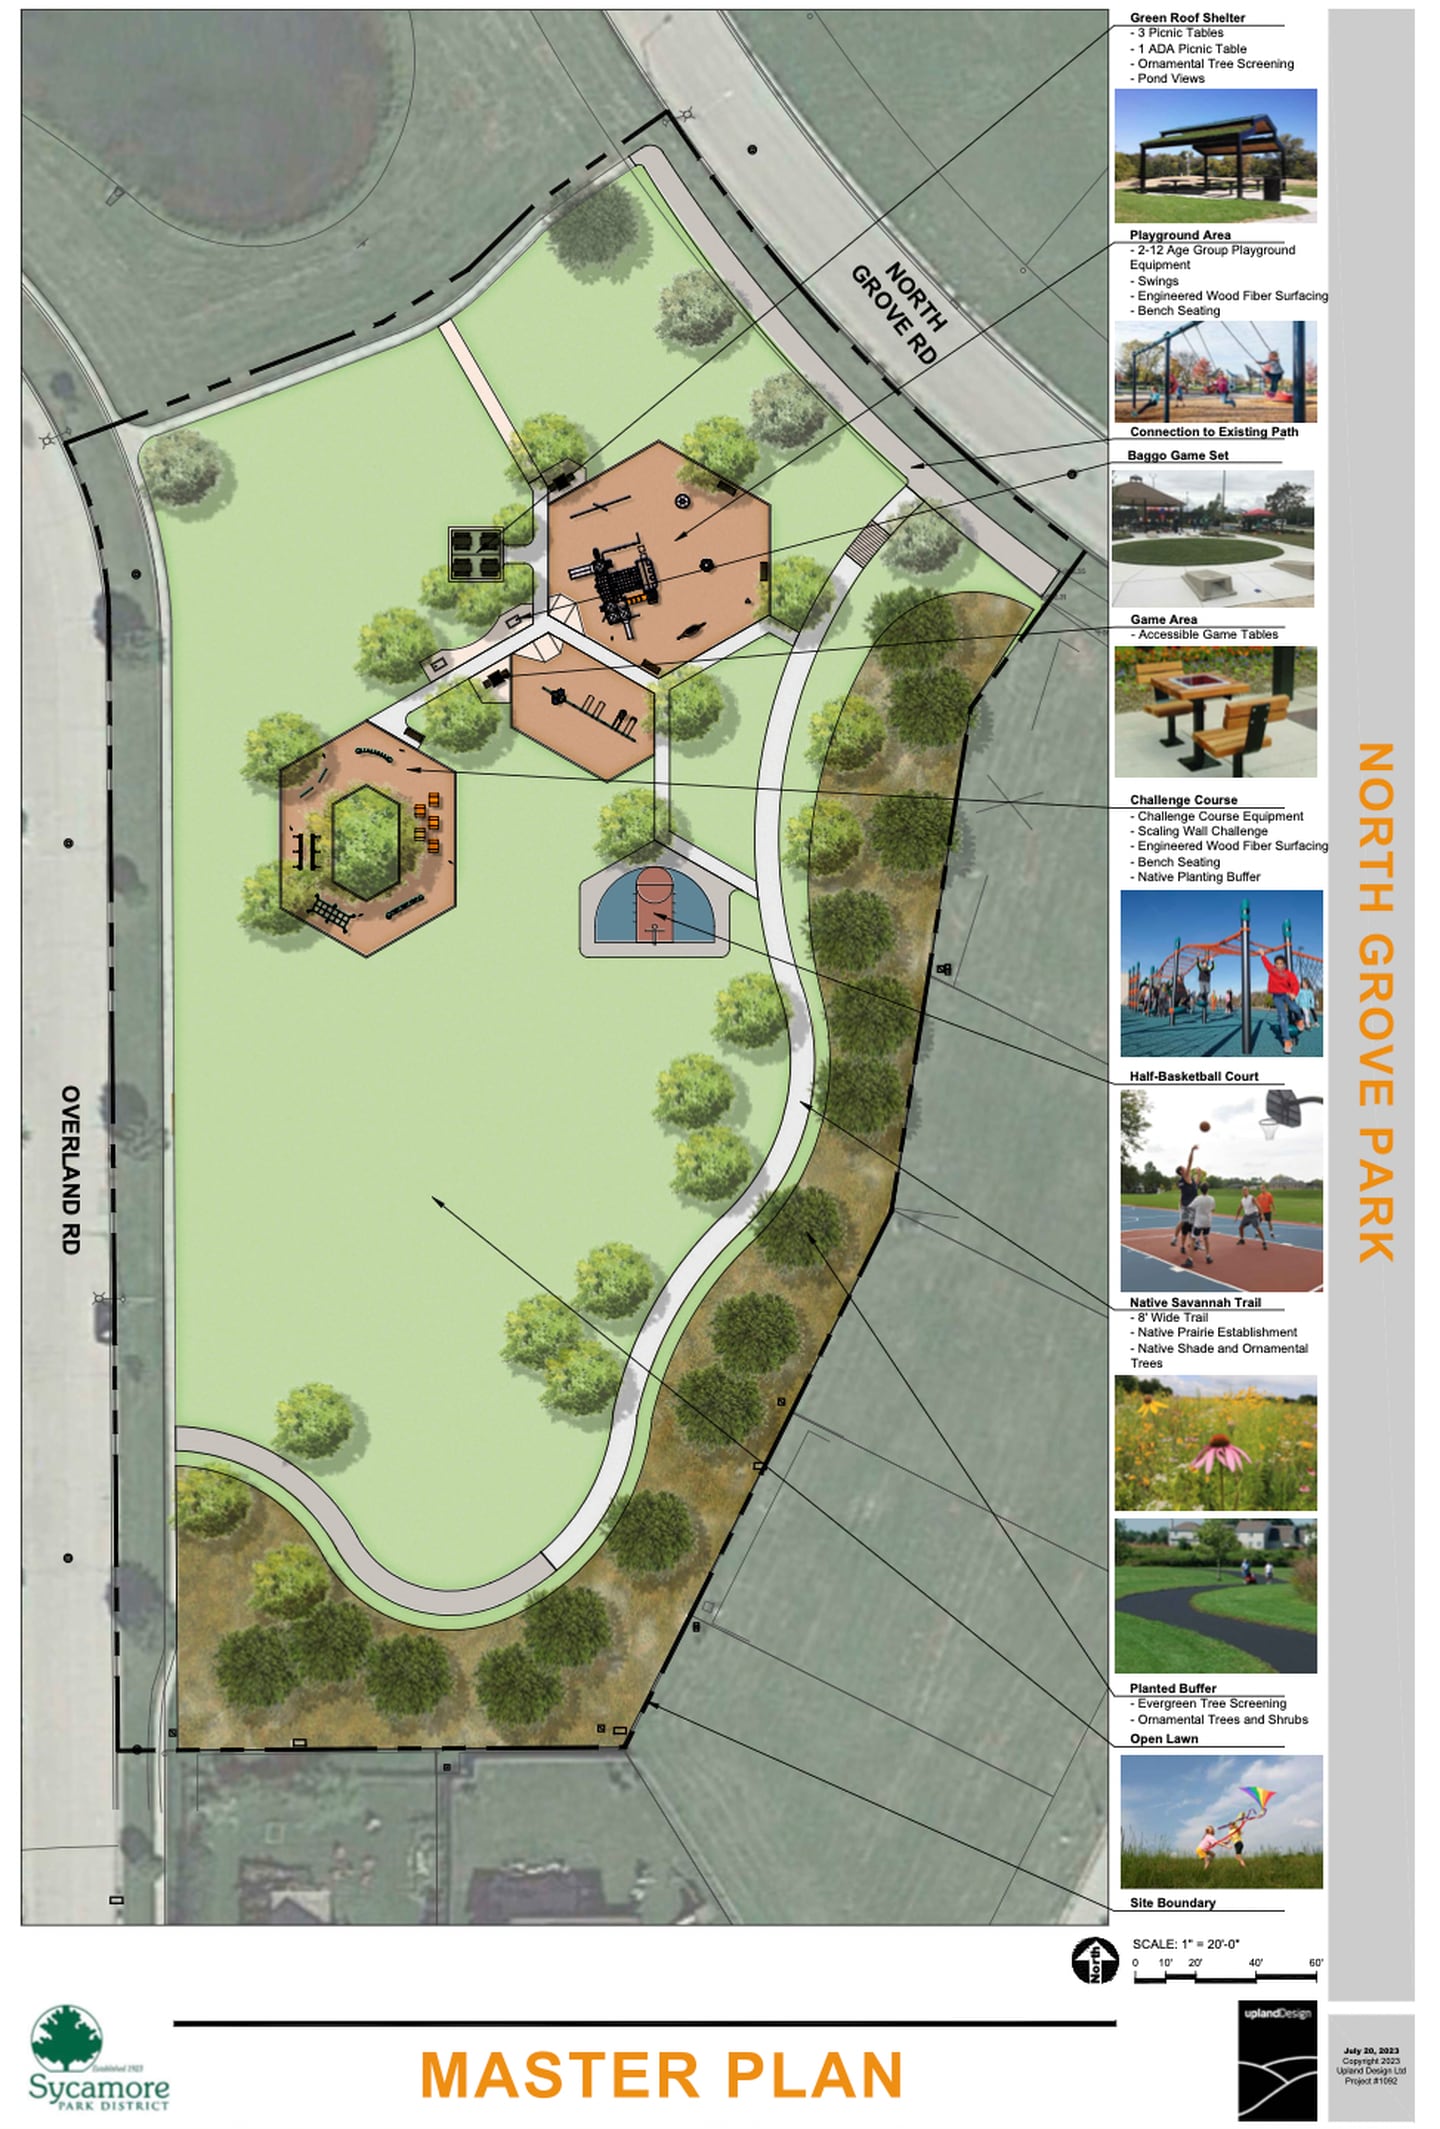 The master plan for North Grove Crossing neighborhood park, provided by the Sycamore Park District.